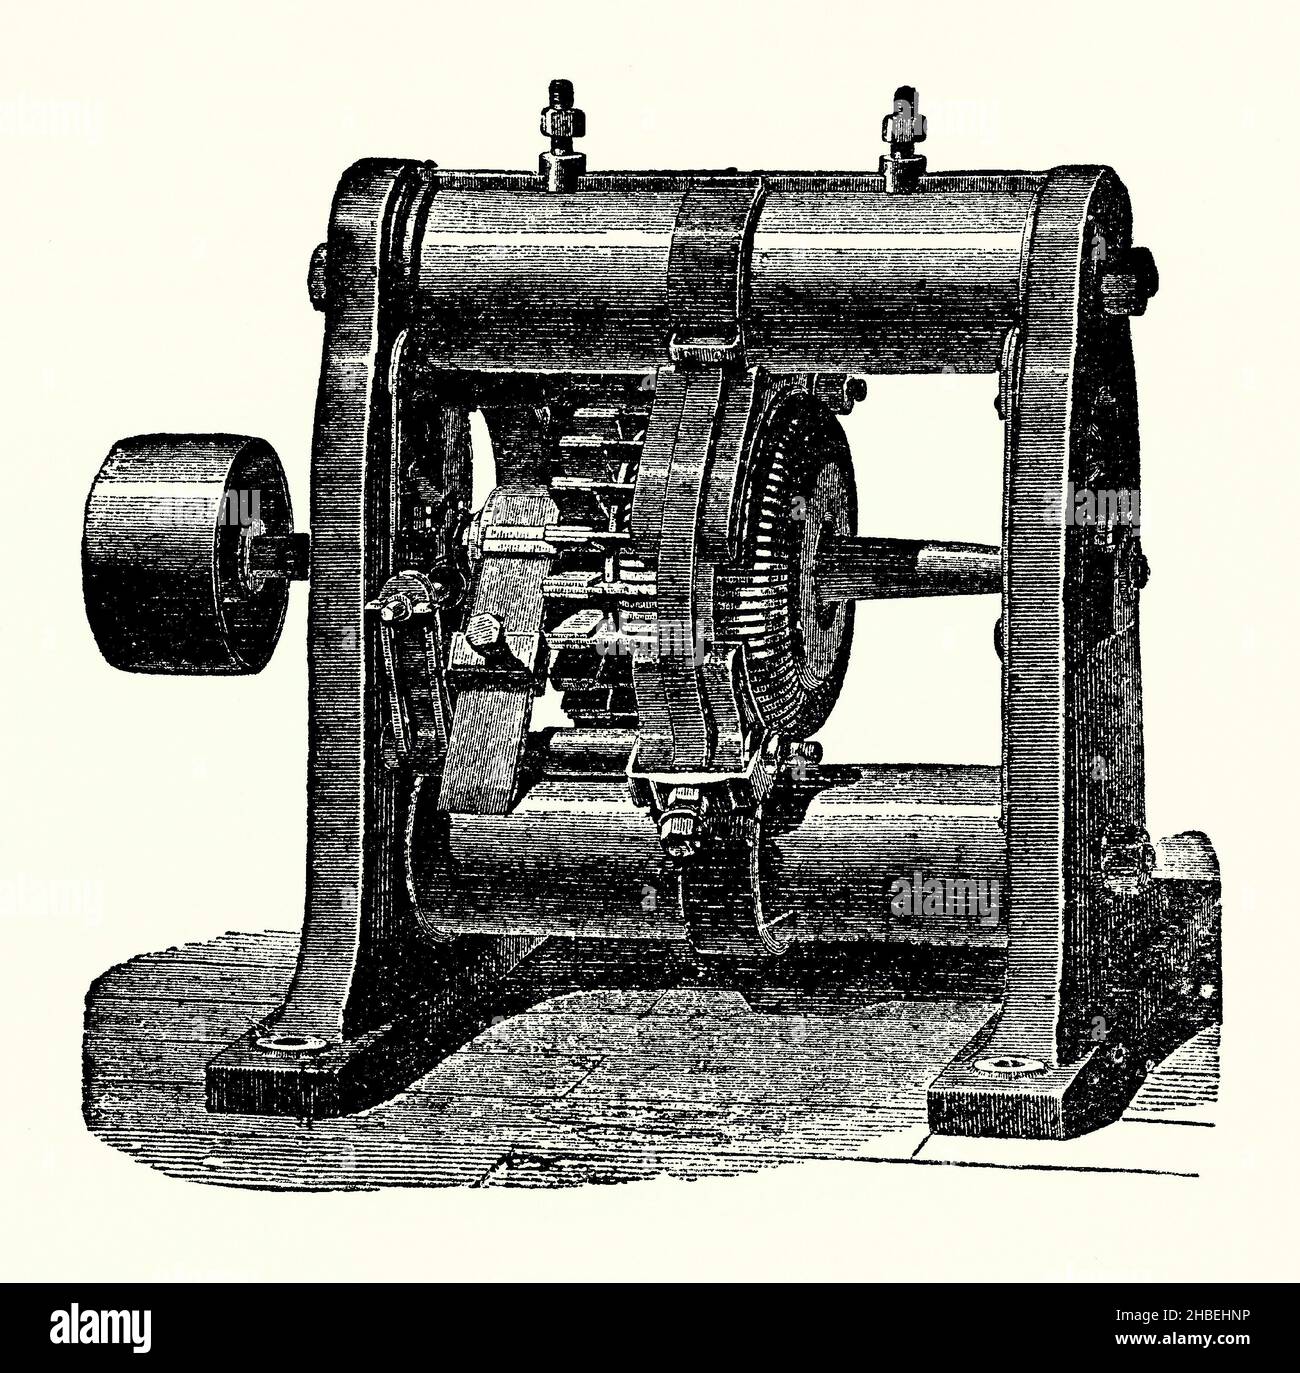 An old engraving of a magneto-electric device of the mid-1800s. It is from a Victorian book of the 1890s on discoveries and inventions during the 1800s. This particular device has horizontal electro-magnets. It was used for producing power rather than for lighting. It is based on a Gramme machine (Gramme ring, Gramme magneto, or Gramme dynamo), an electrical generator that produces direct current, named after its Belgian inventor, Zénobe Théophile Gramme (1826 –1901). It was built as either a dynamo or a magneto. It was the first generator to produce enough power for industrial use. Stock Photo